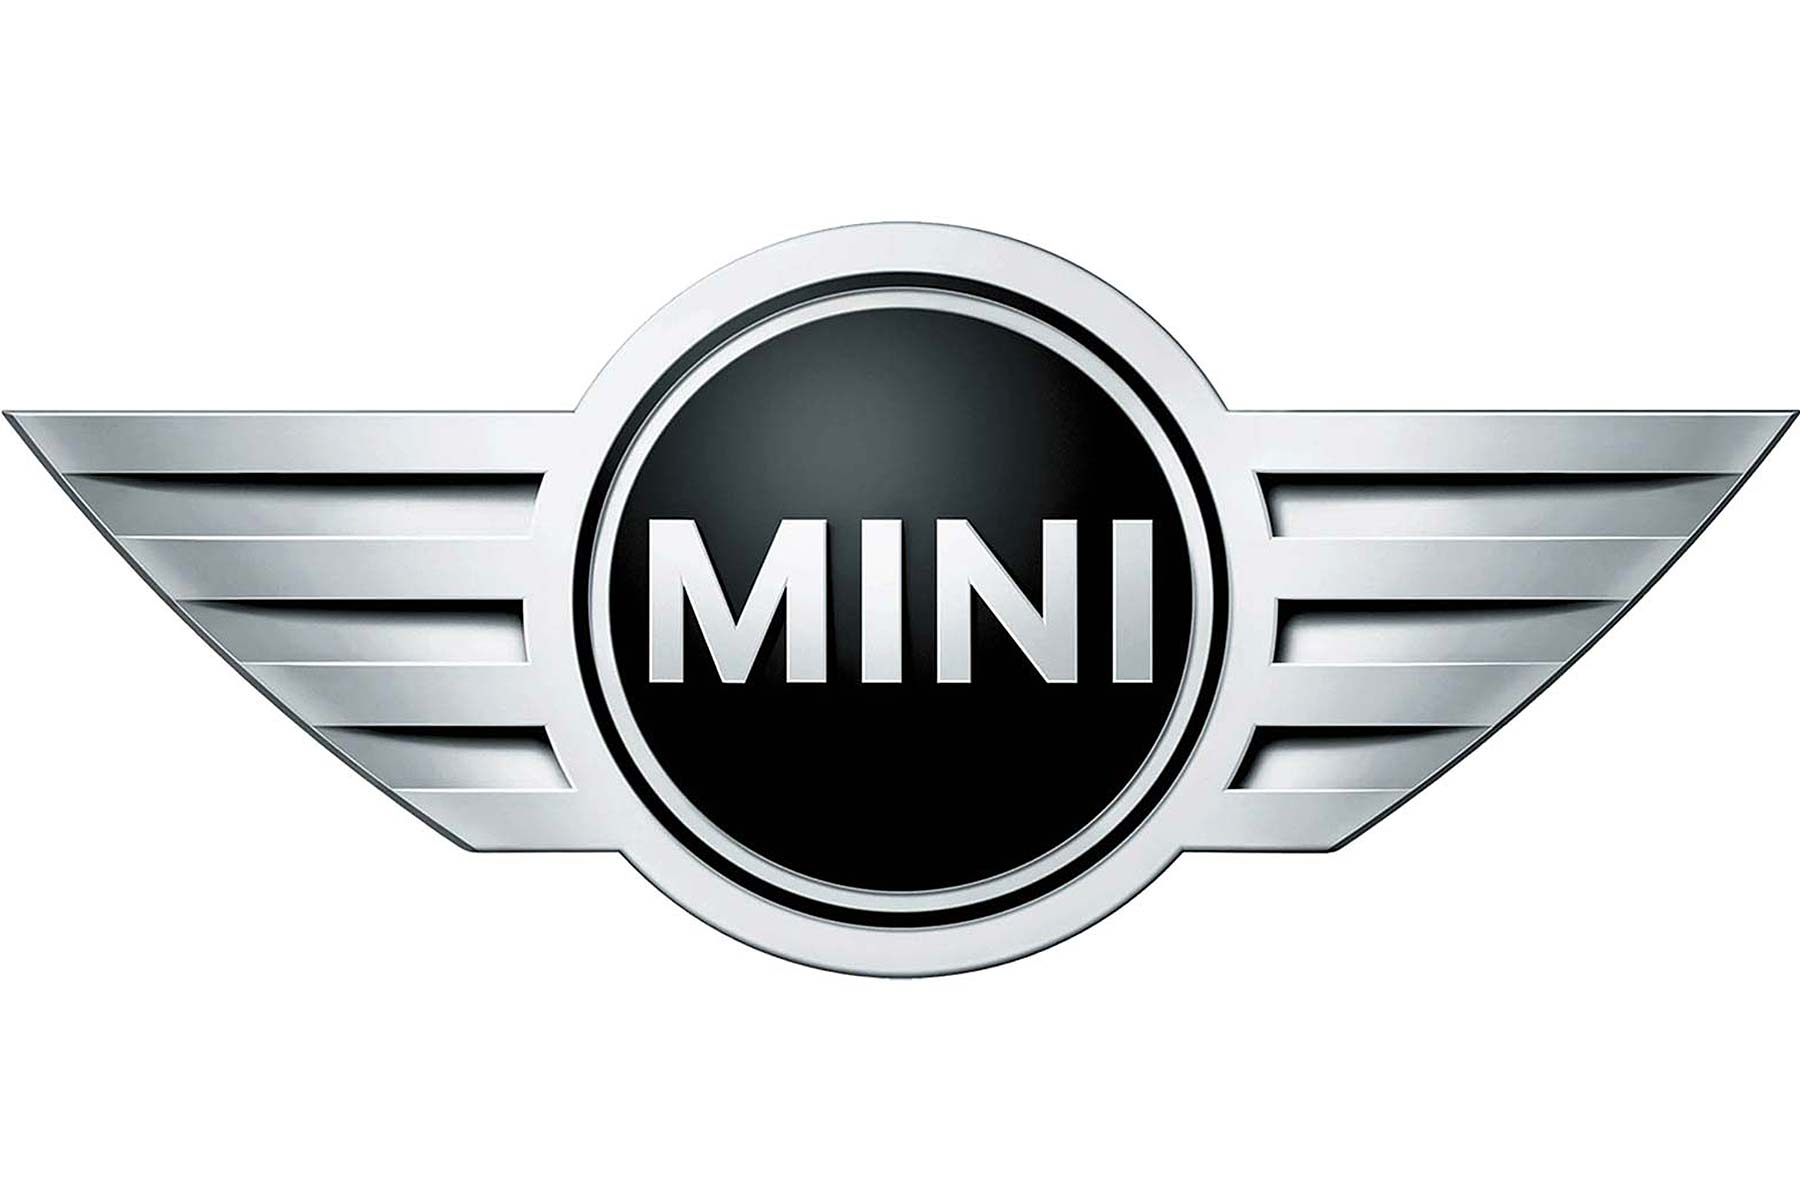 New Mini Logo - Mini is getting a new logo for 2018 | Motoring Research